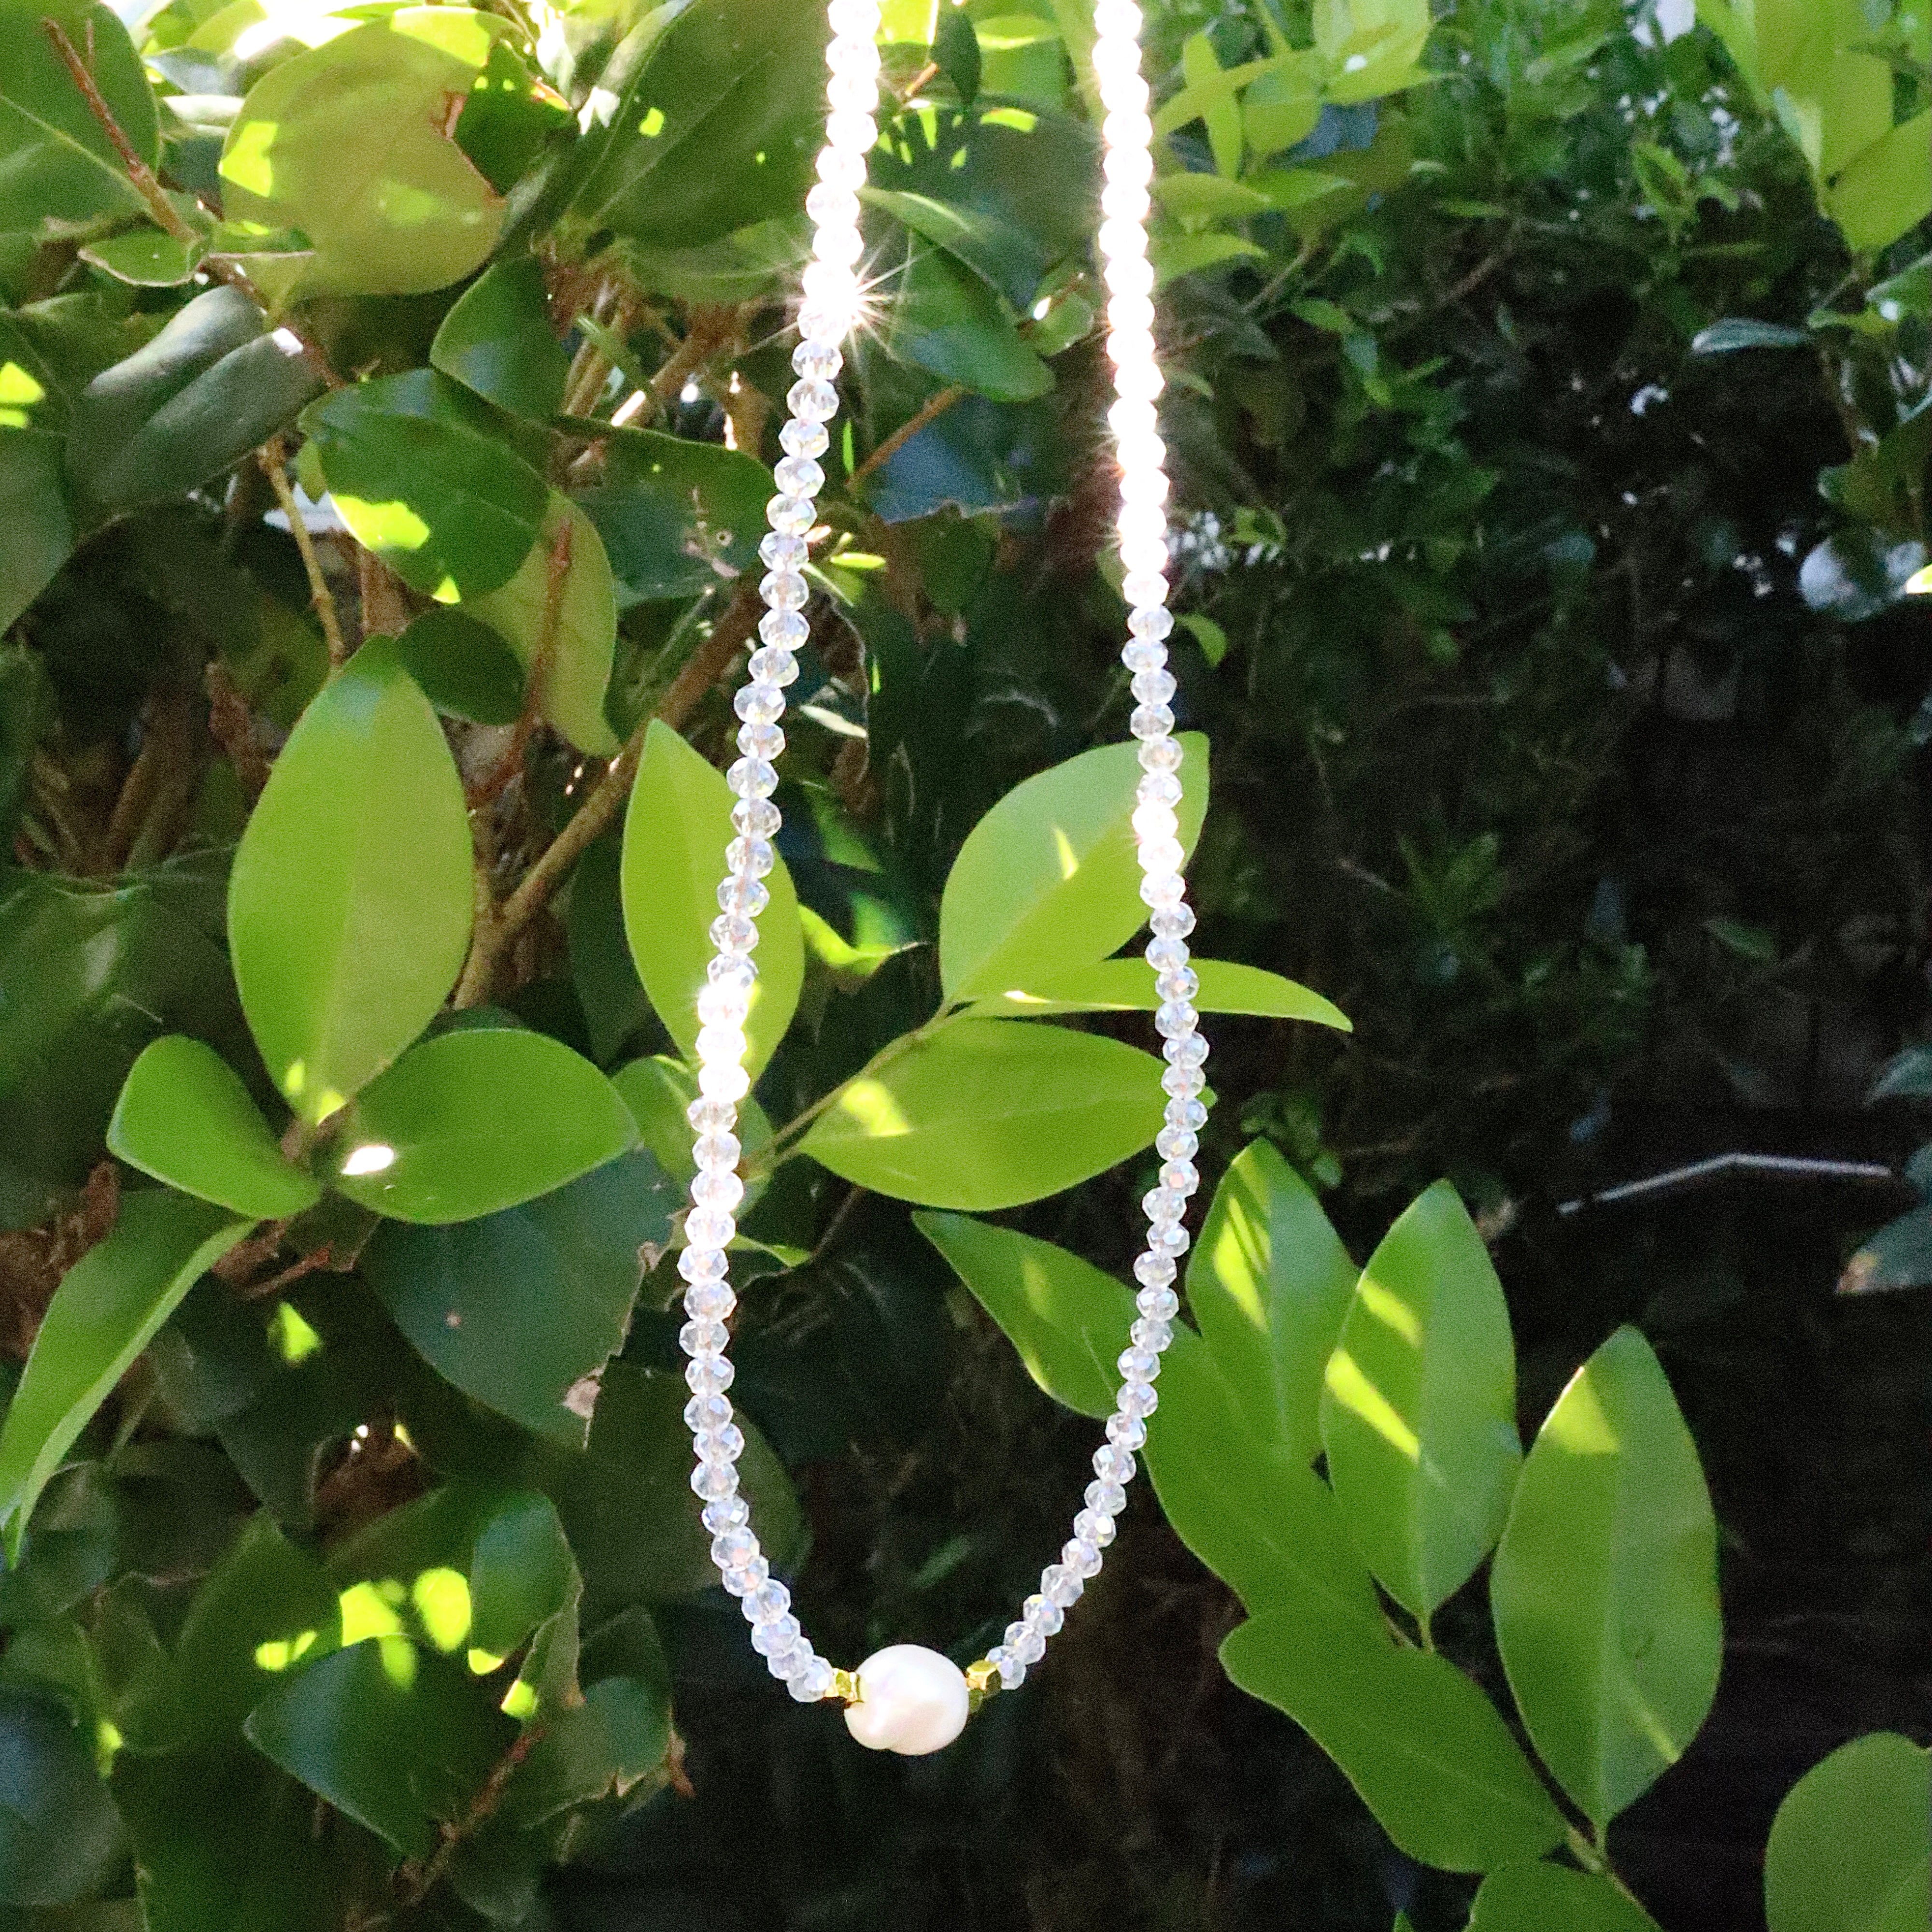 Iridescent Clear Crystal Pearl Necklace